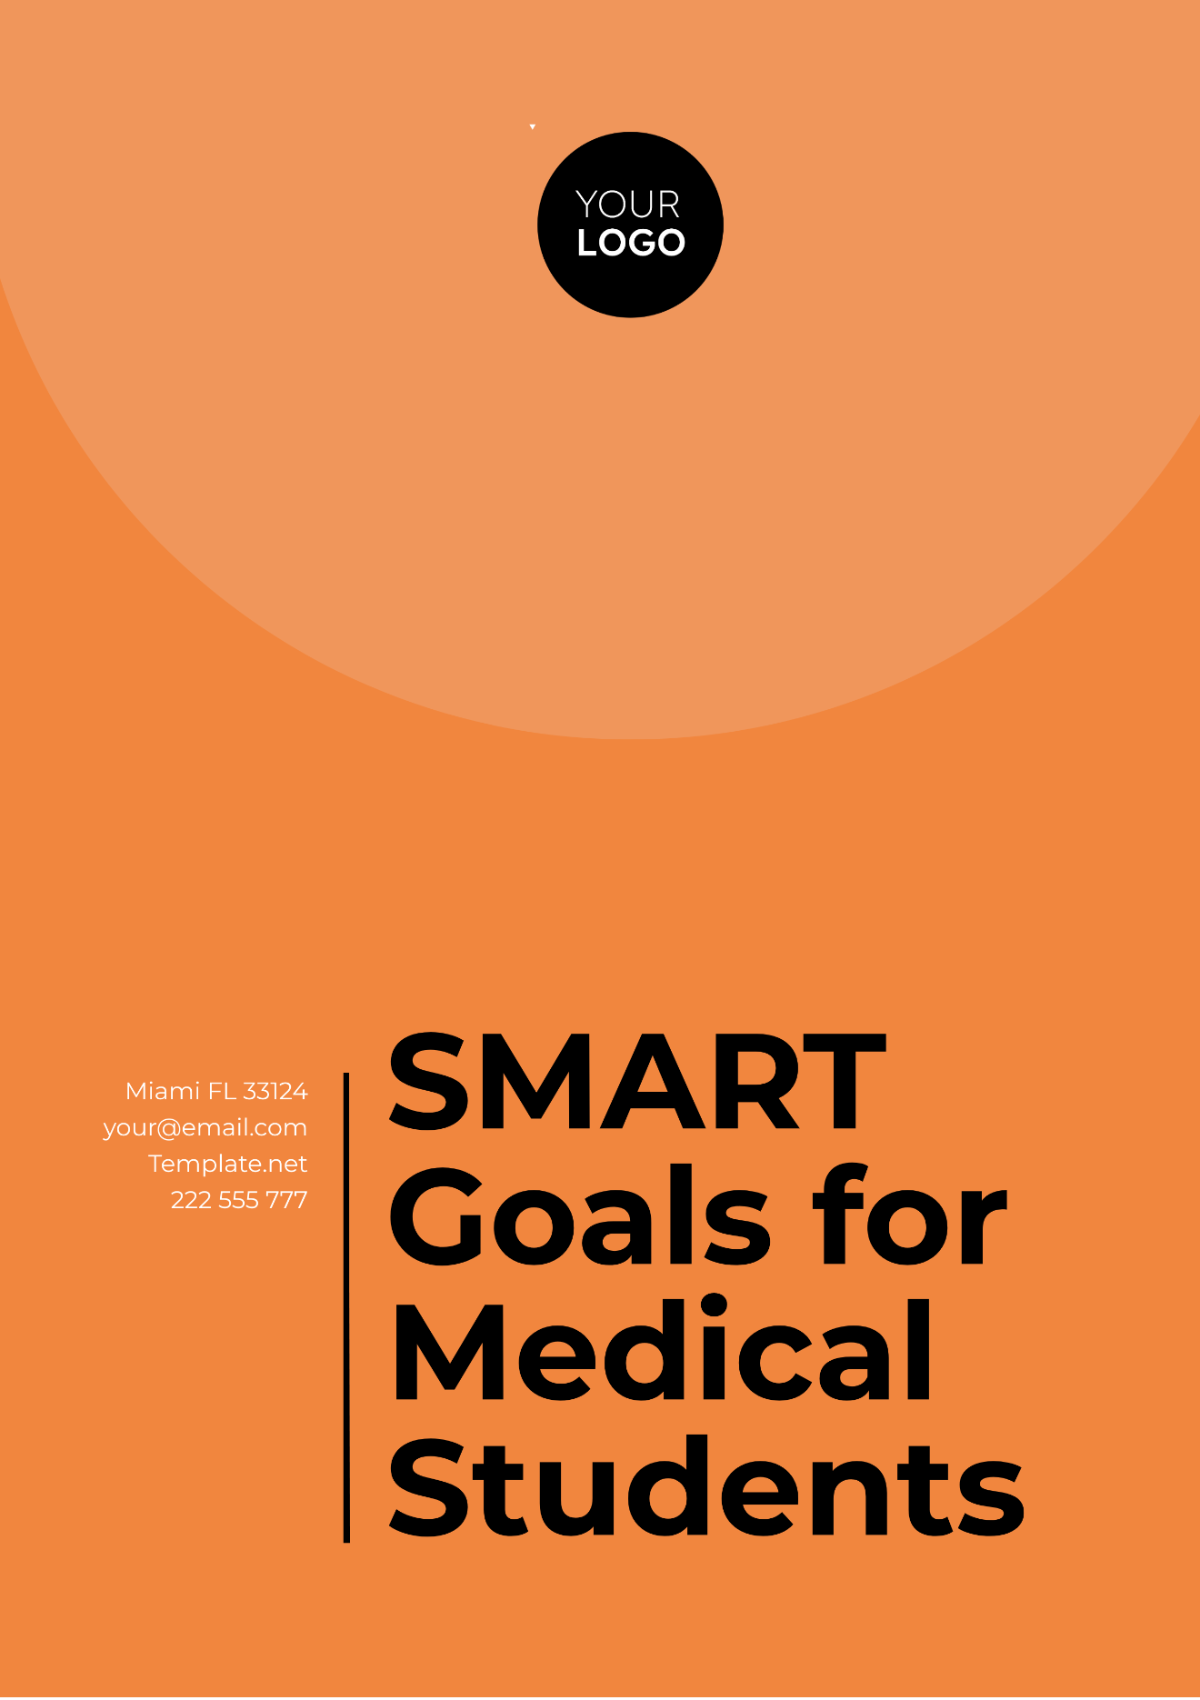 SMART Goals for Medical Students Template